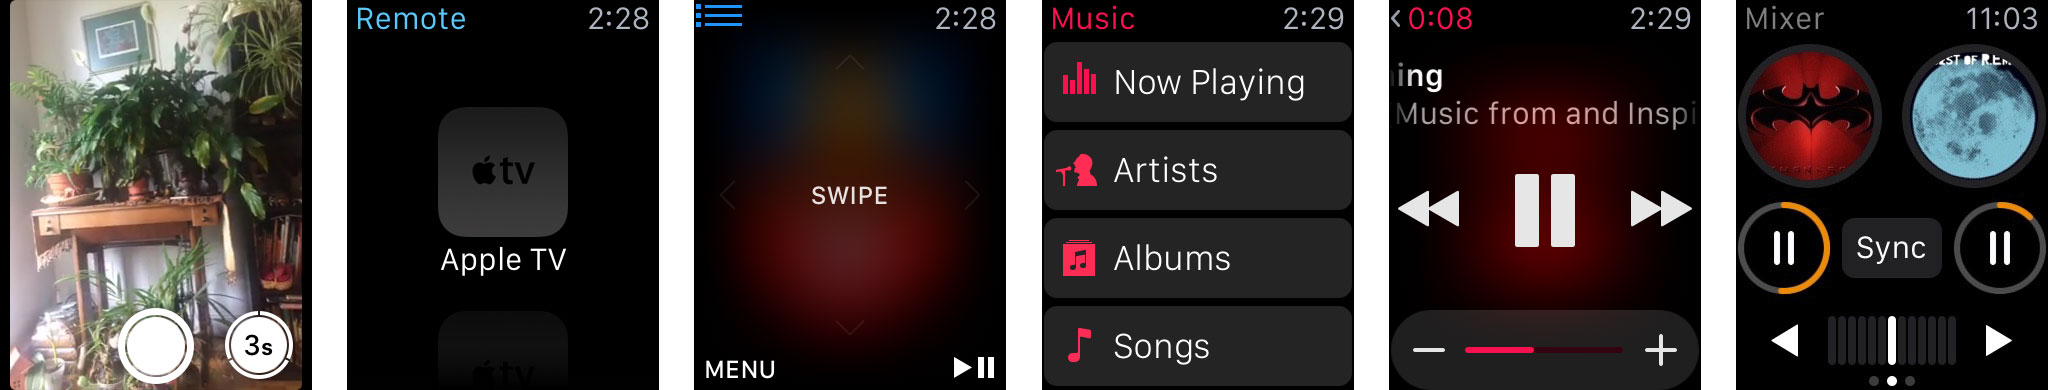 Camera Remote, Apple Remote, Music app, djay for Apple Watch